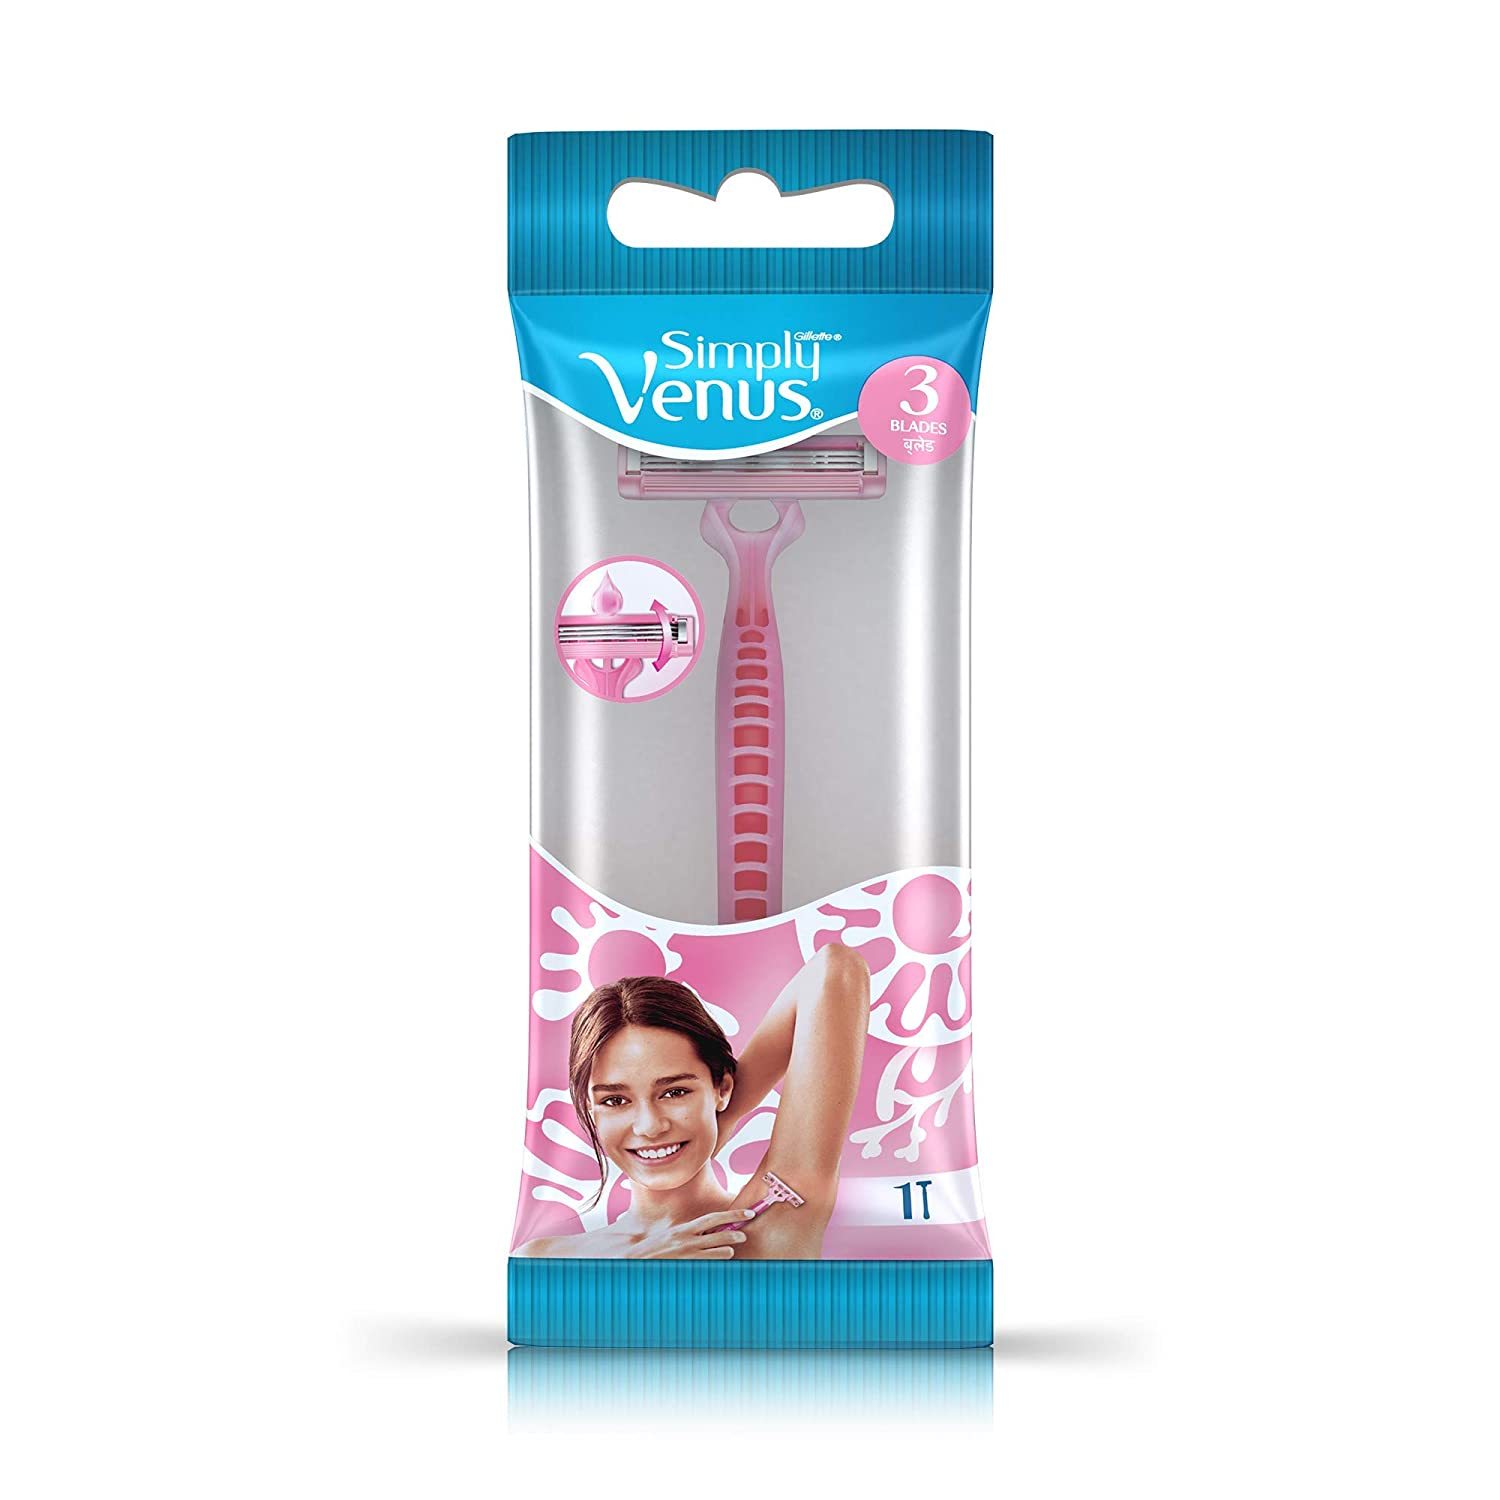 Gillette Simply Venus 3 Hair Removal Razors for Women Pack of 5 - $17.59